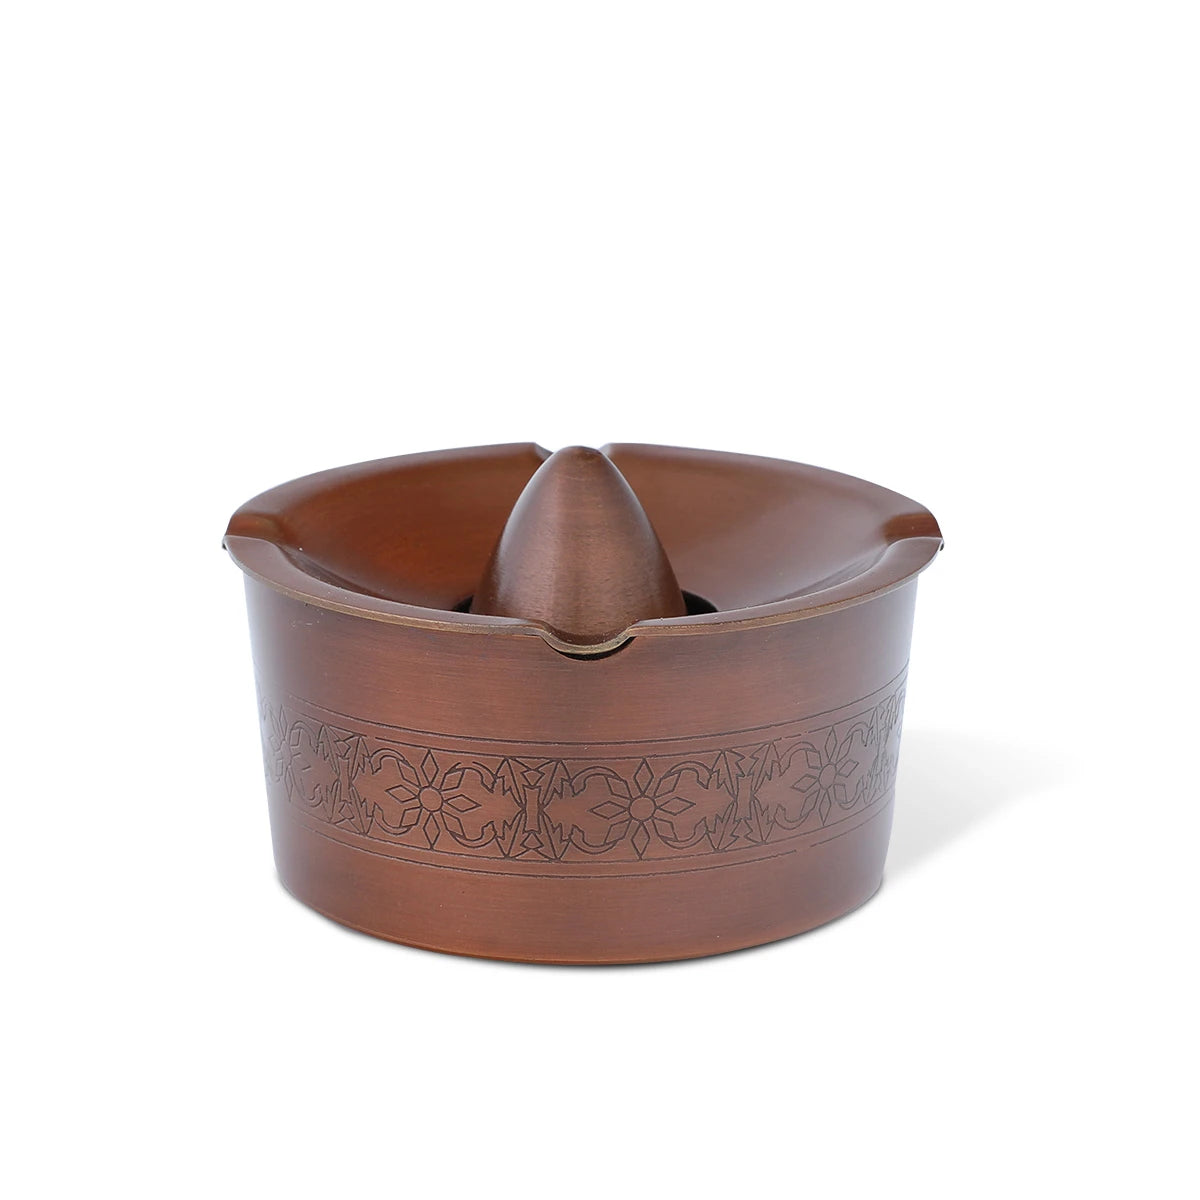 Angled Front View of Vintage Ashtray With Ornamental Décor